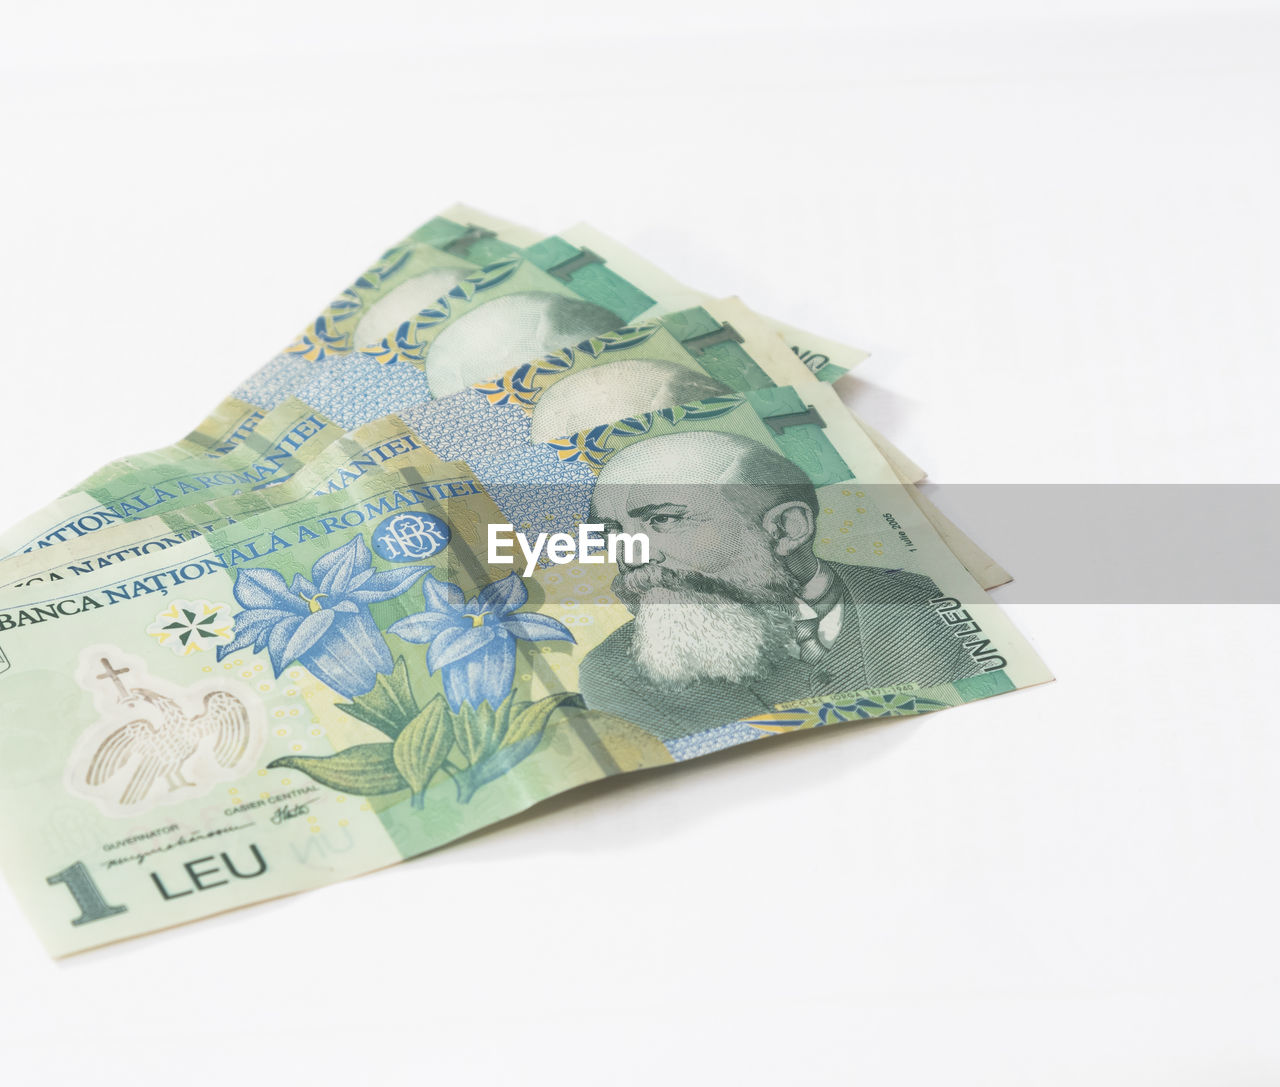 Close-up of paper currency on white background